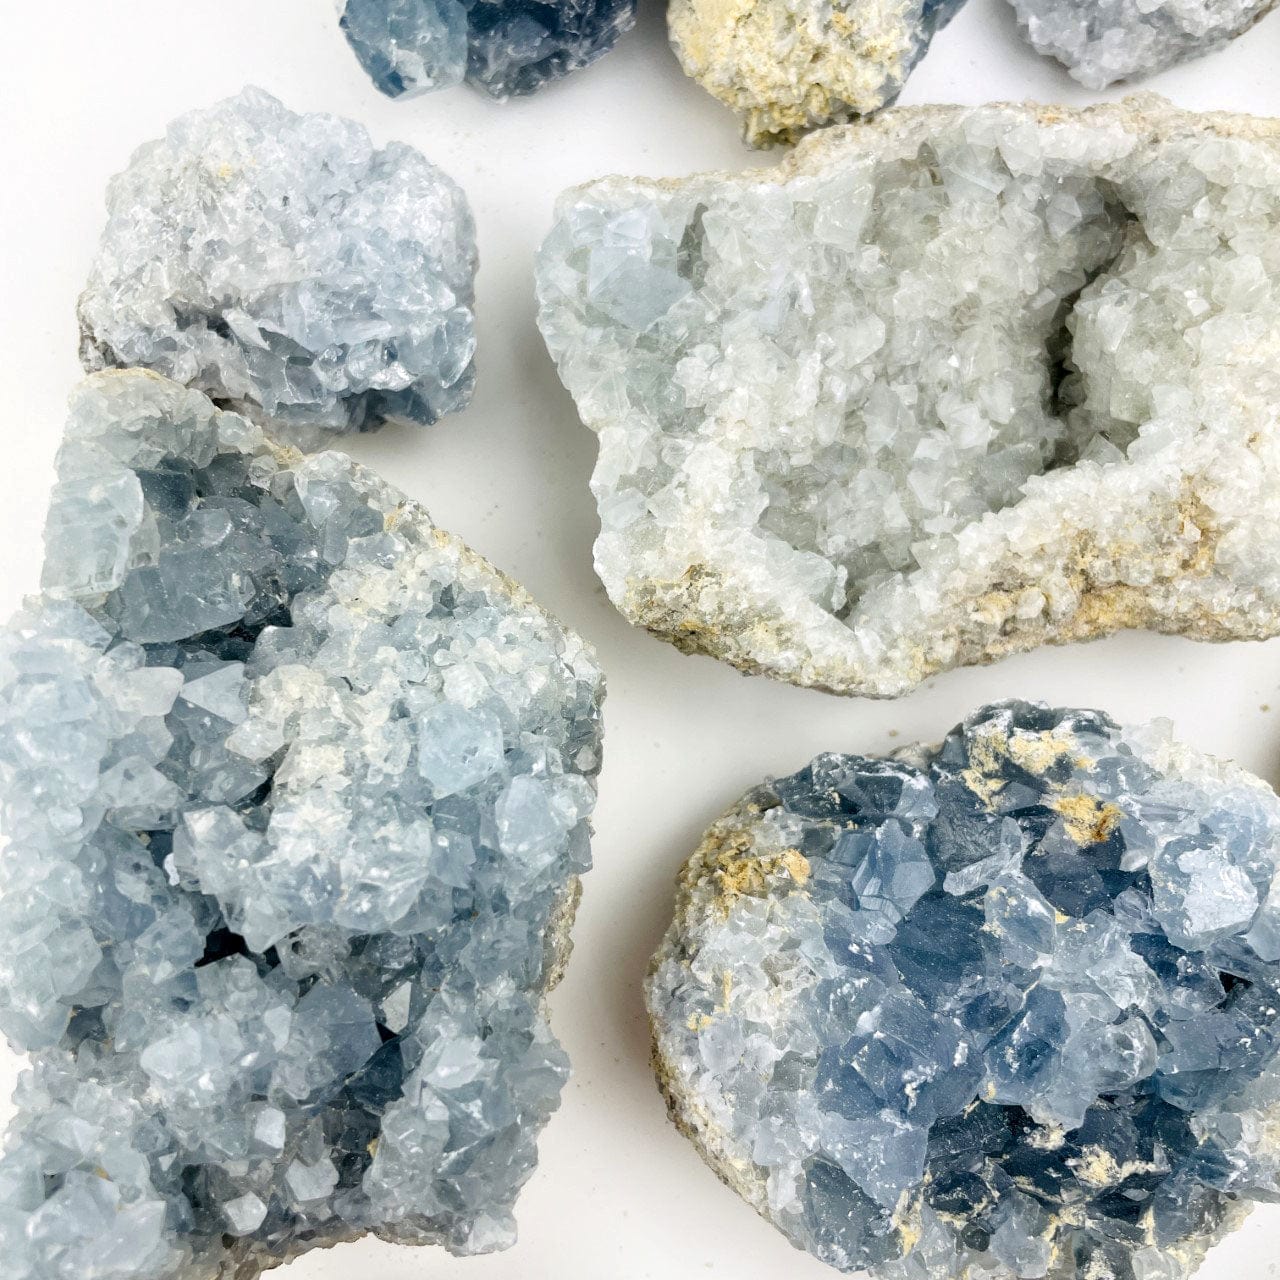 Celestite Crystals in varying shades of blue